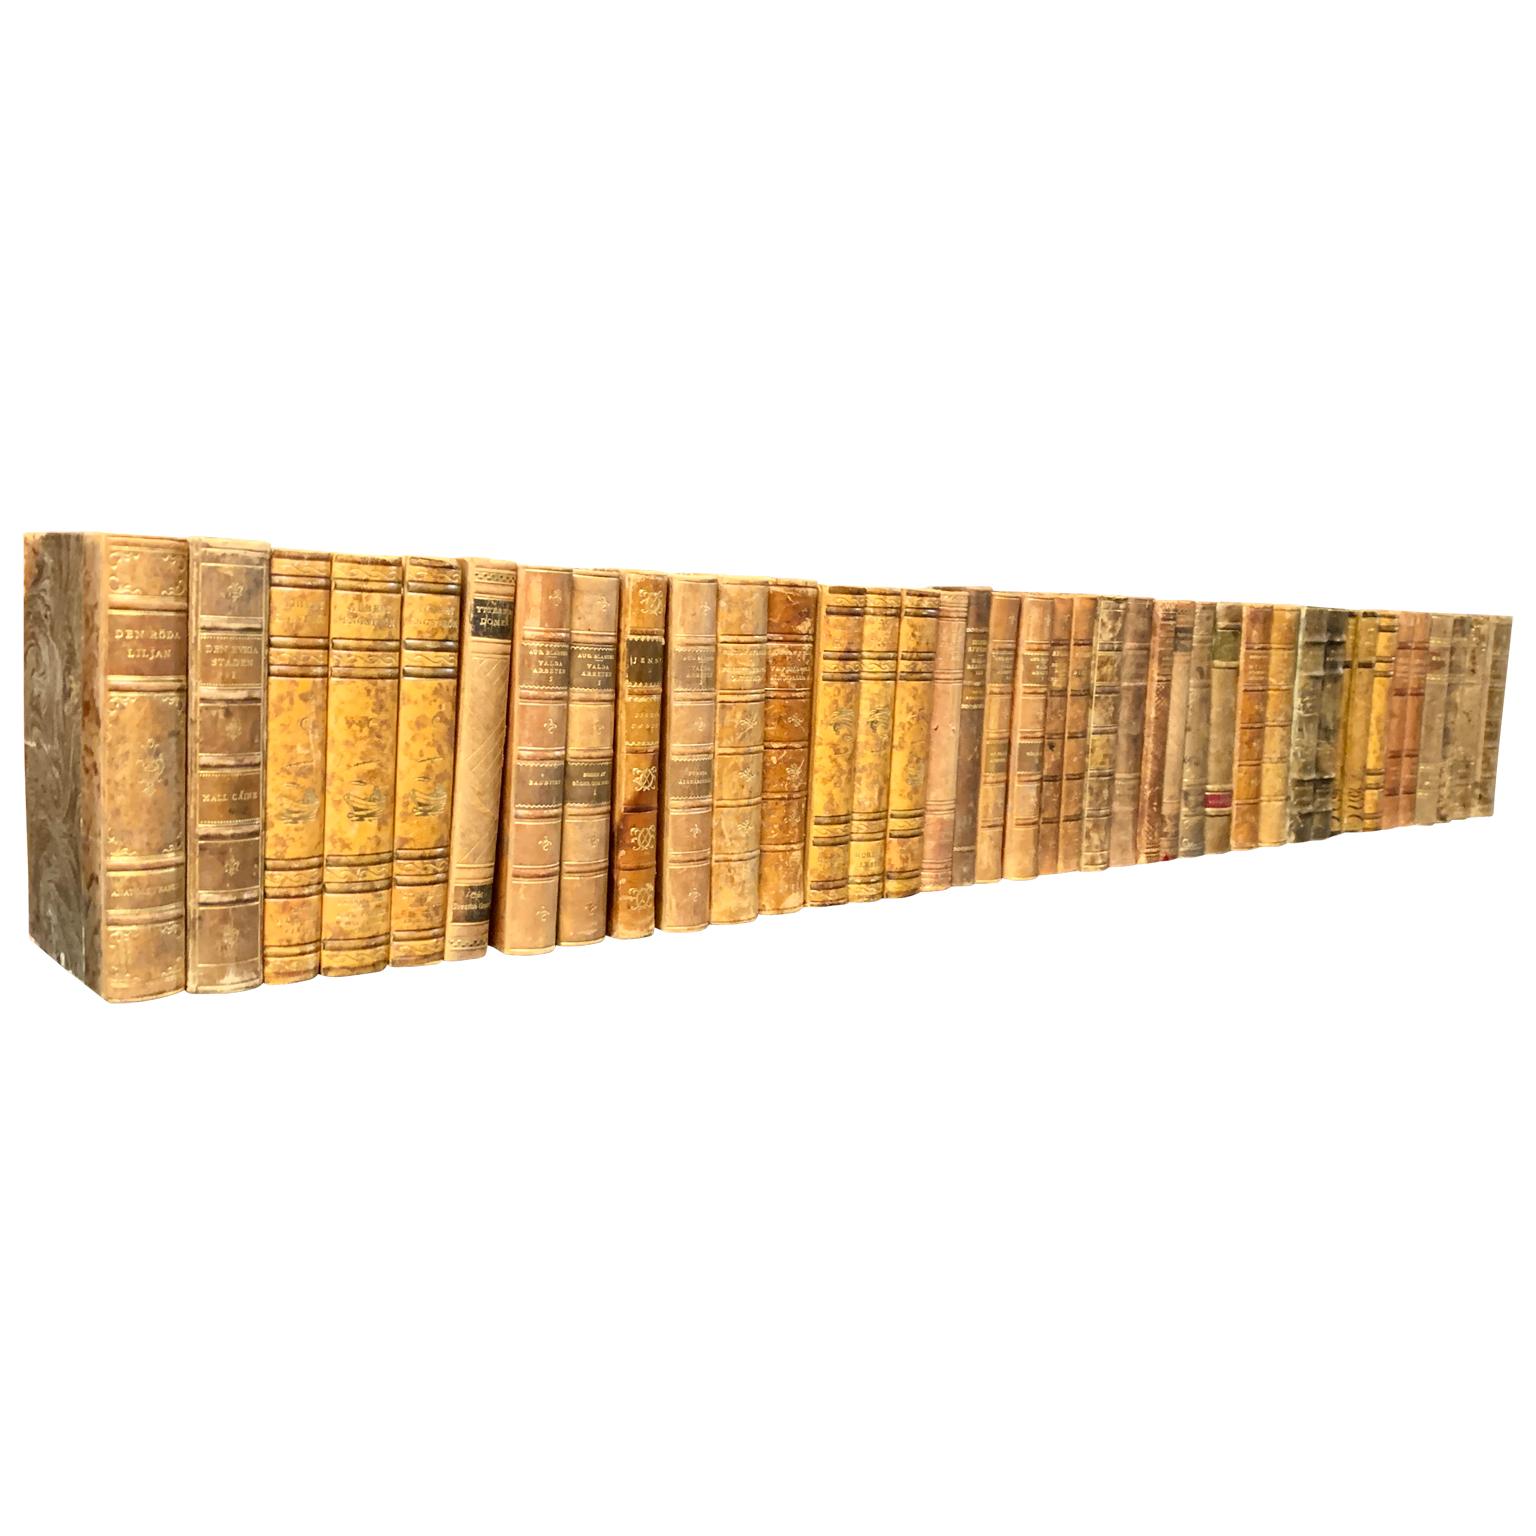 A collection of 40 Swedish decorative antique leather-bound library books.
The books are wrapped in leather-bound covers, comprised of a selection of warm tones and gold leaf print embossing.
The book collection measure horizontally is 1, 23 m,